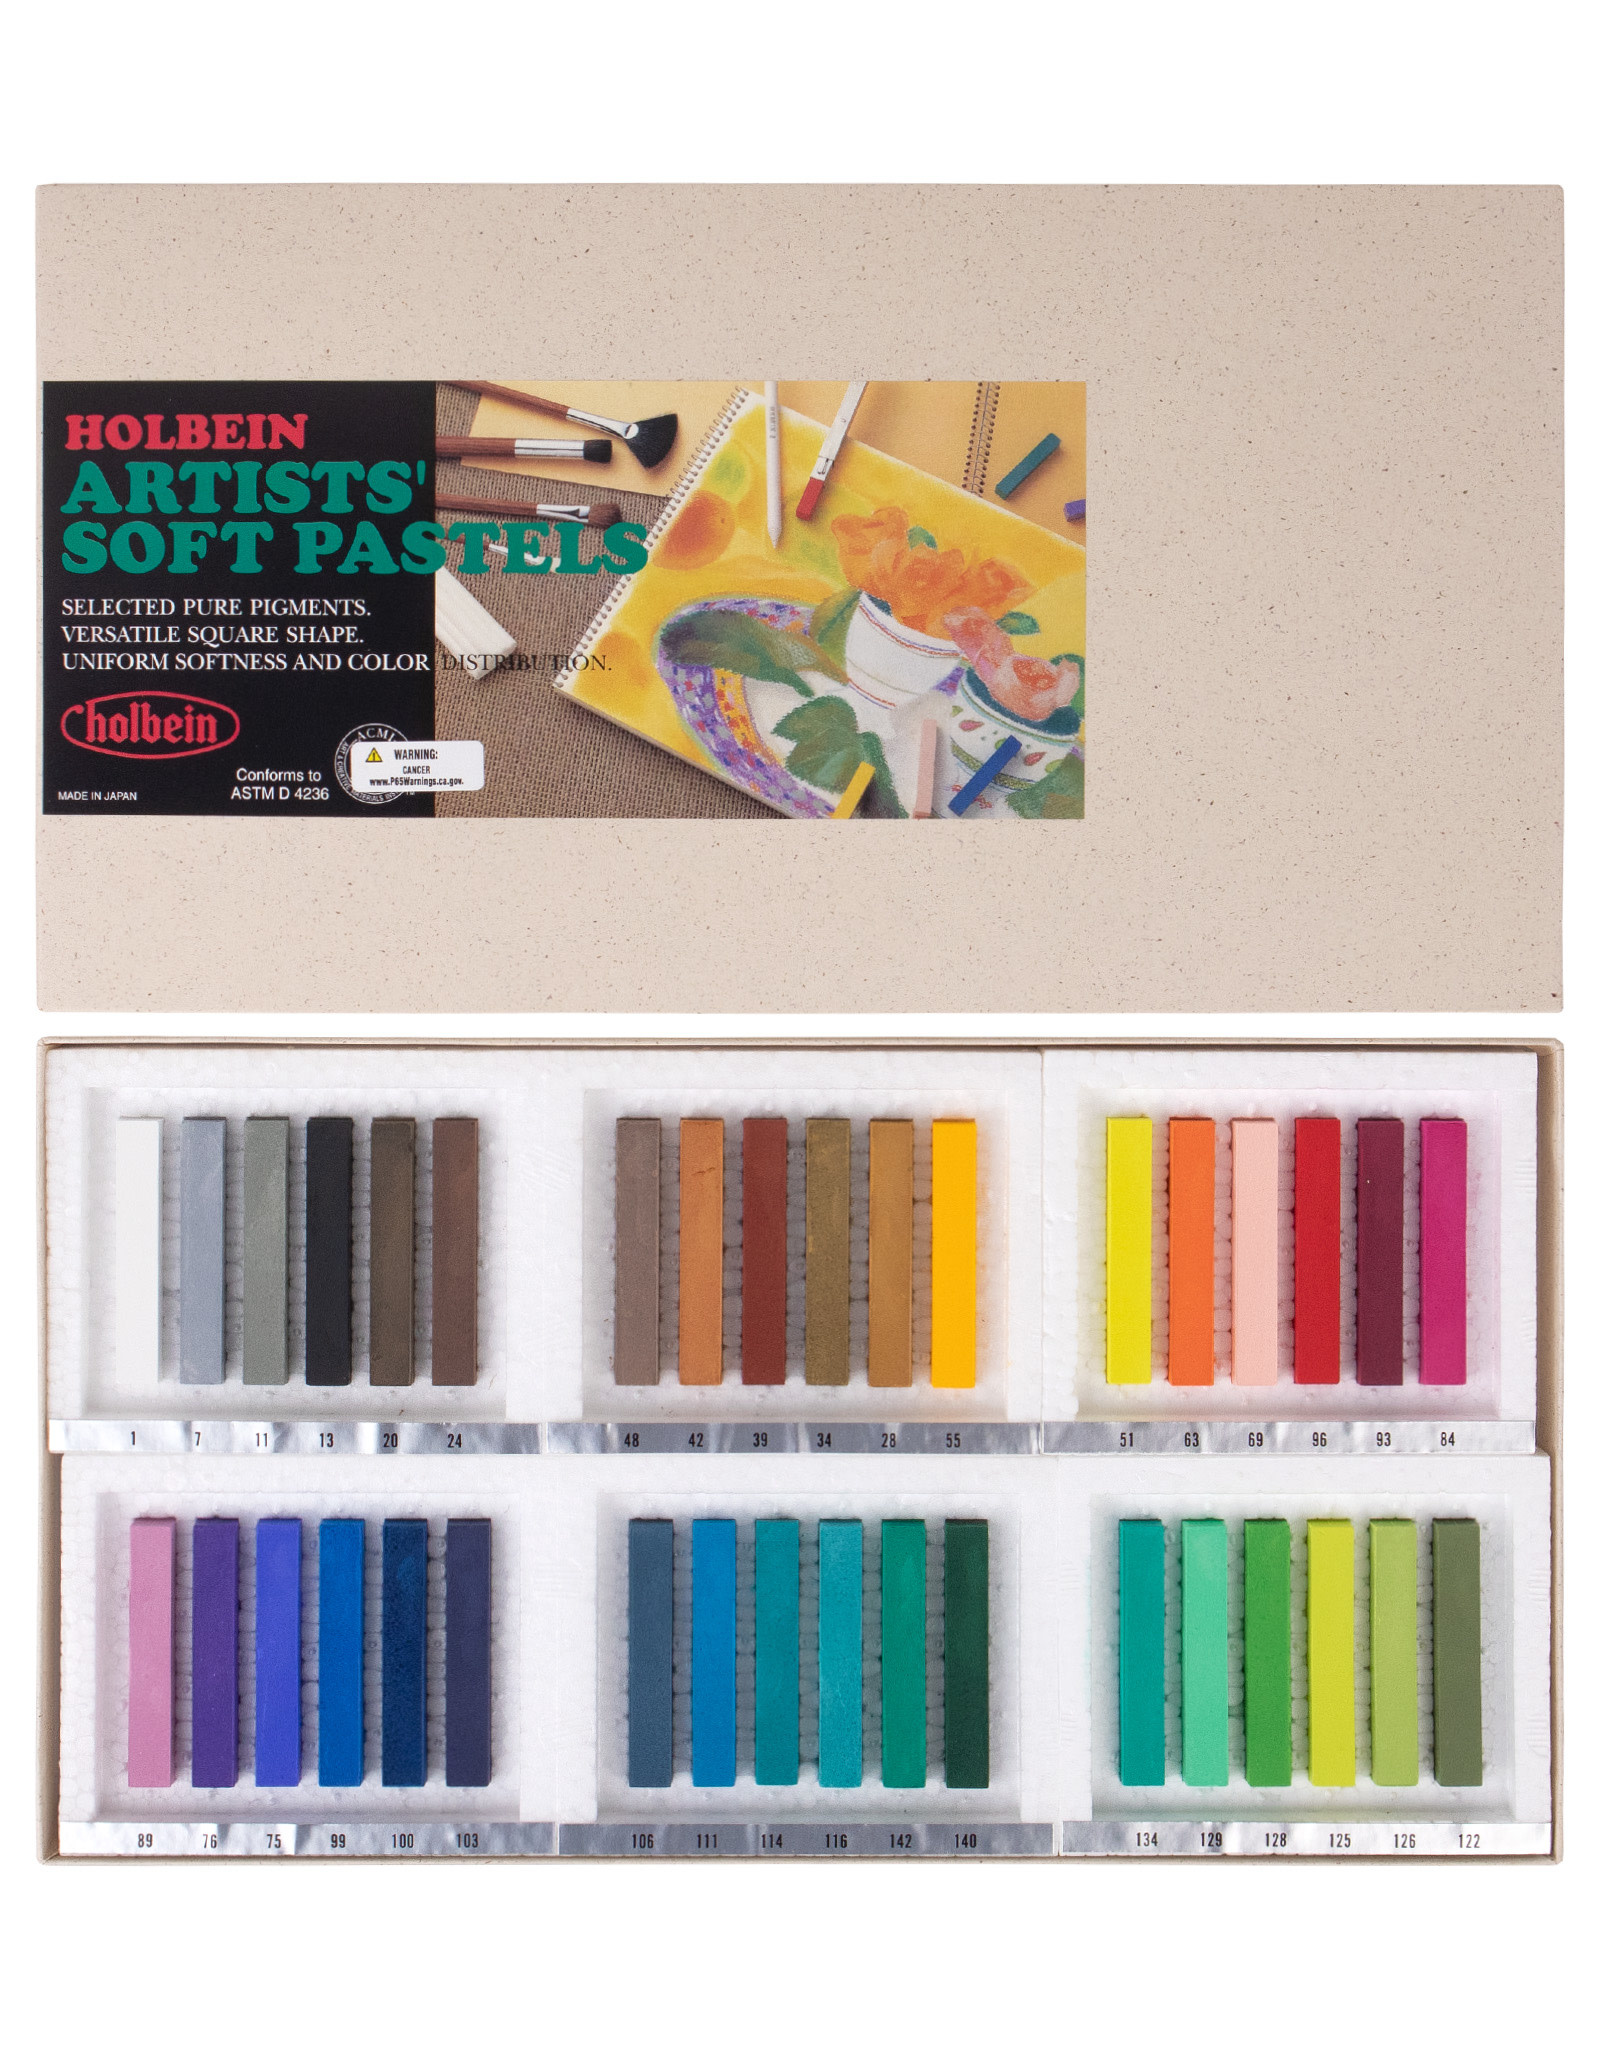 Holbein Artists' Soft Pastel Landscape Set of 48 - The Art Store/Commercial Art  Supply